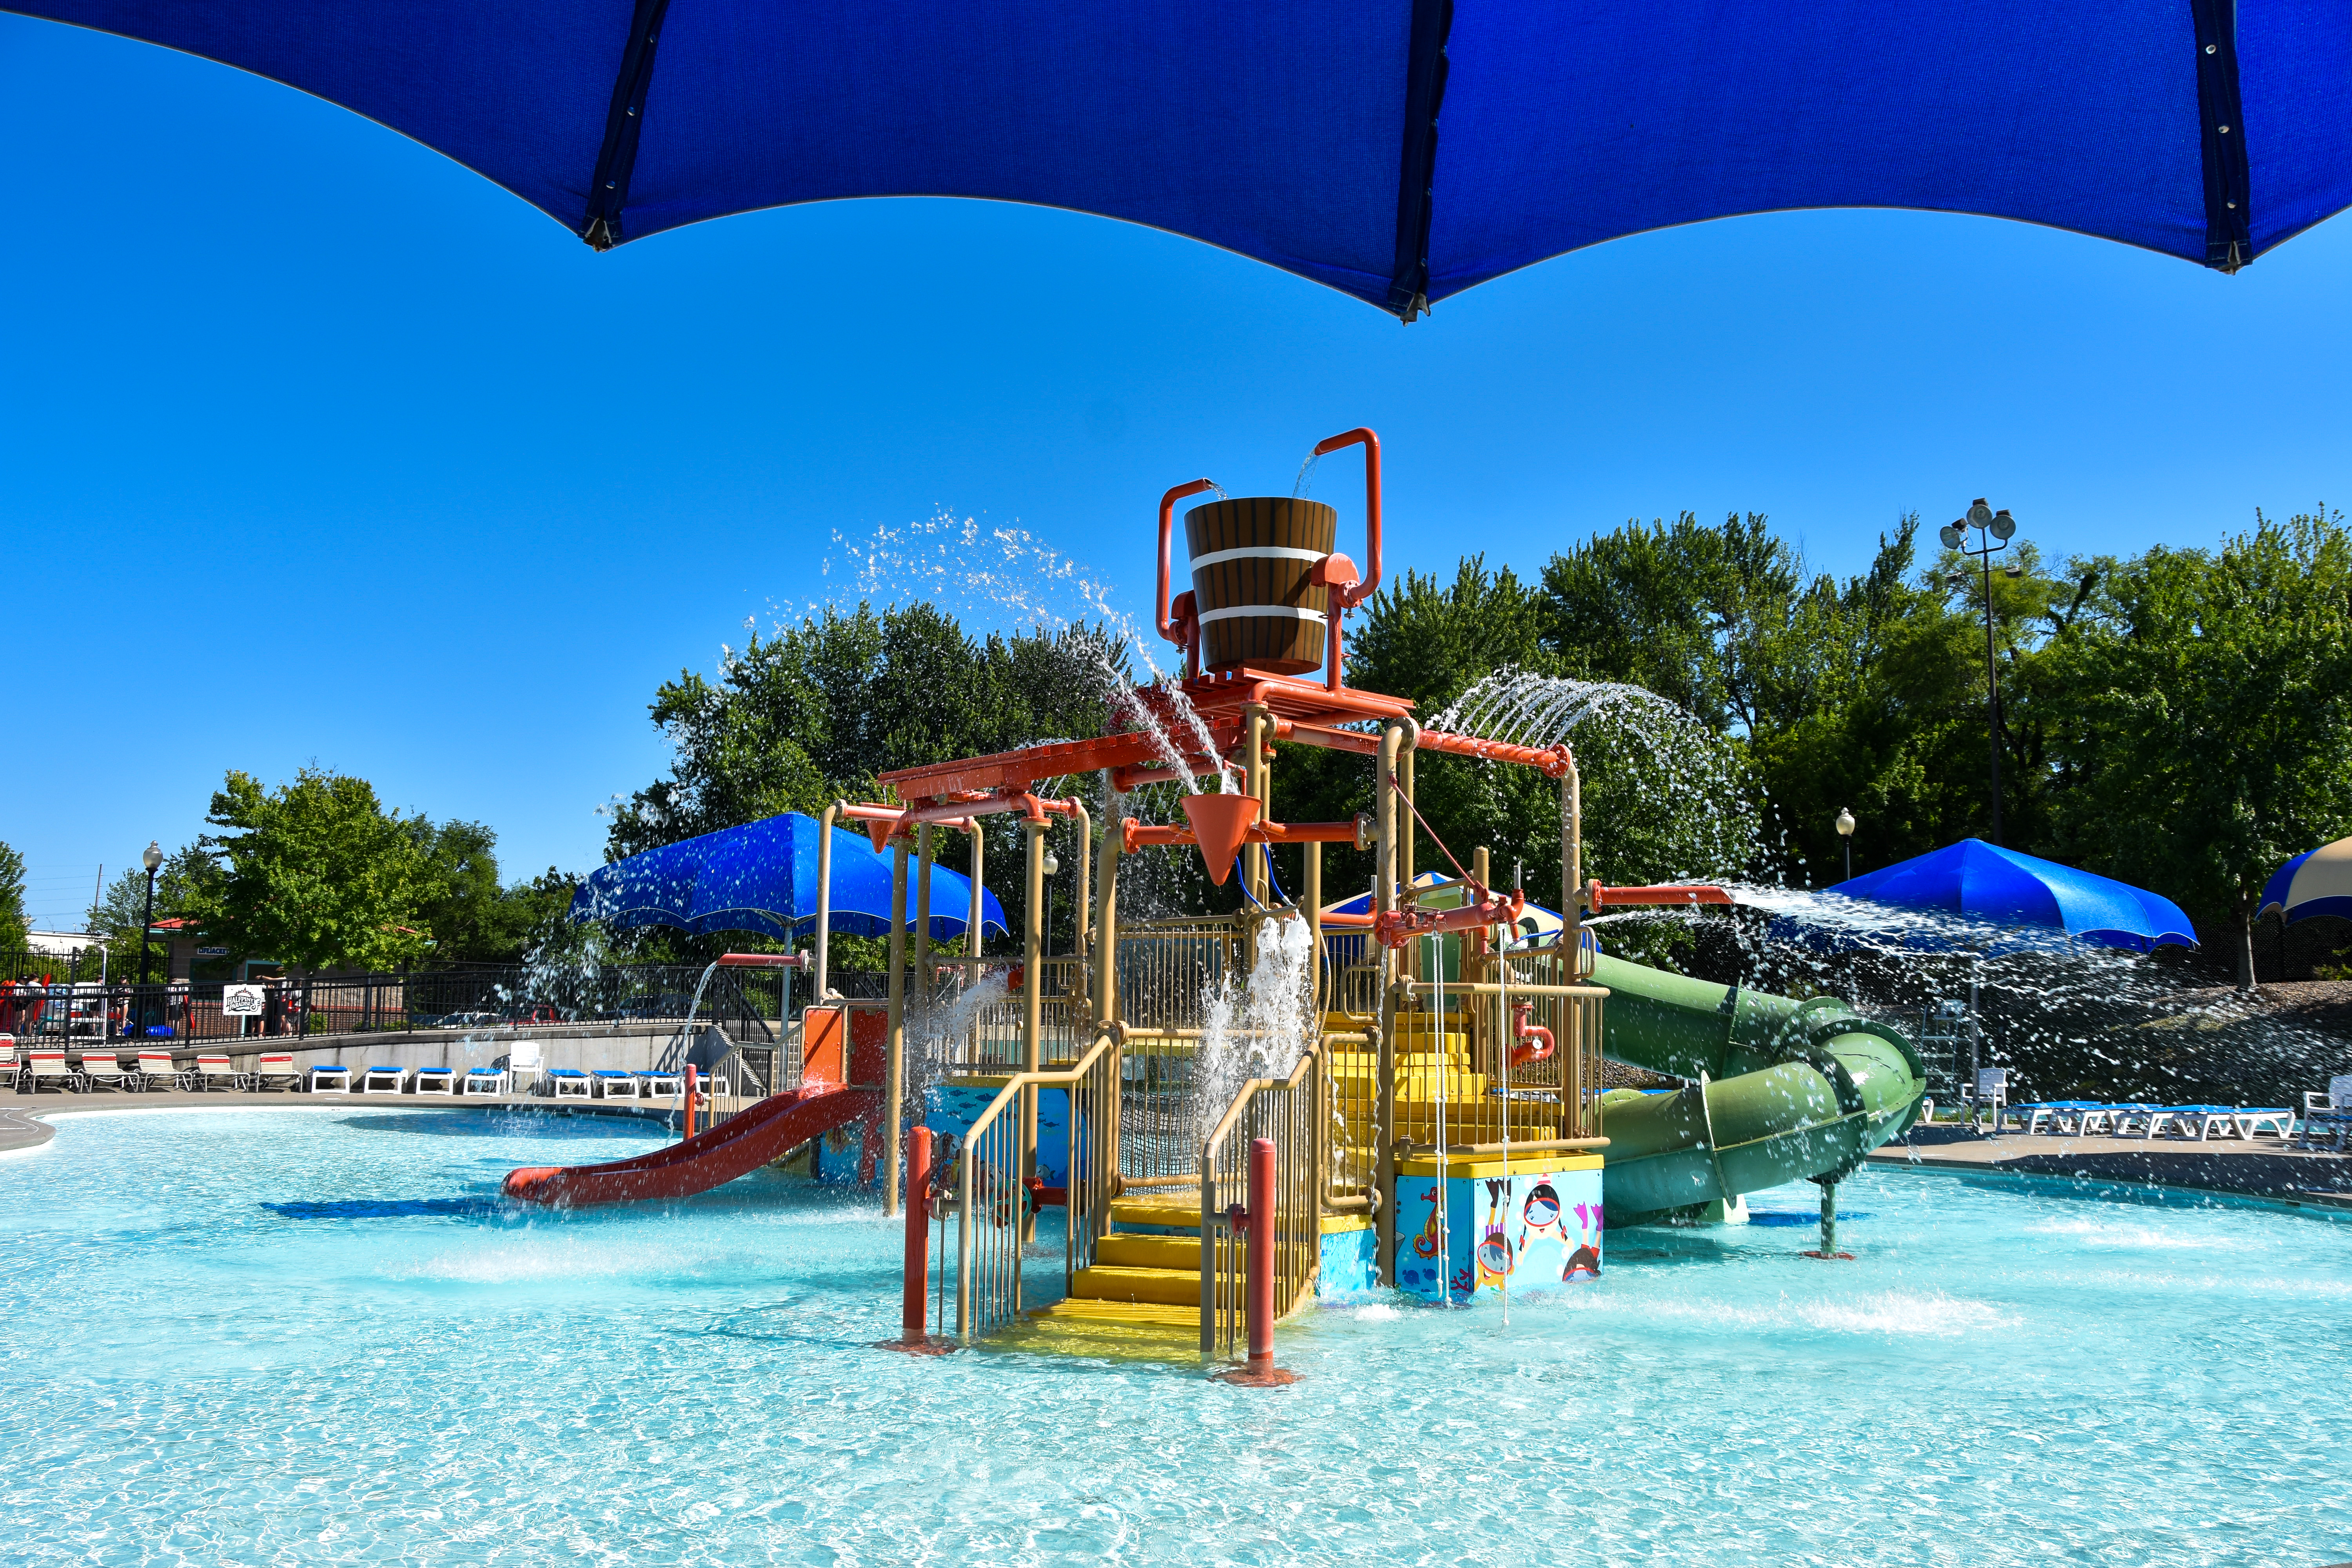 A water park filled with sparkly blue water and a clear blue sky. The water park equipment is brightly painted in a rainbow of colors